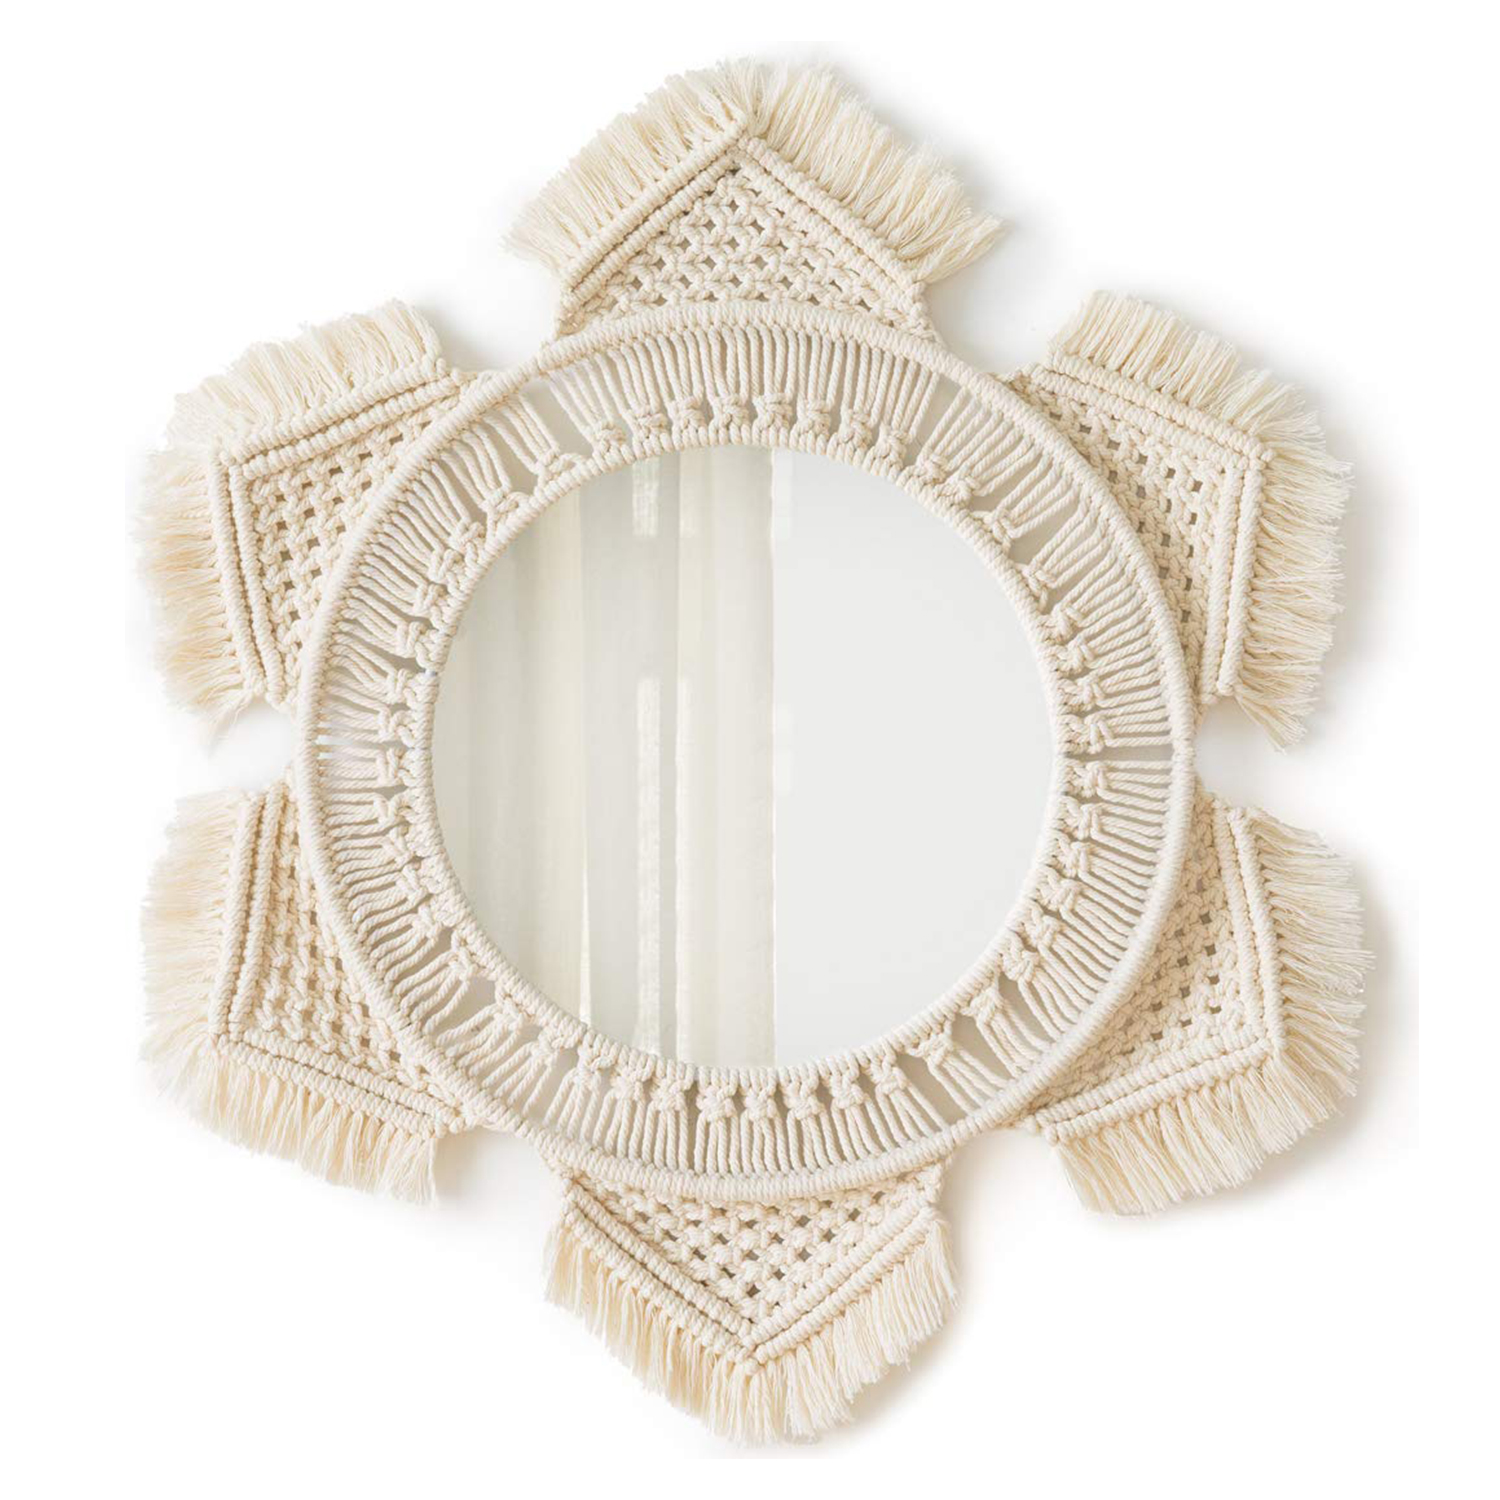 cotton handmade macrame wall decorative mirrors  manufacturer, Supplier and exporter